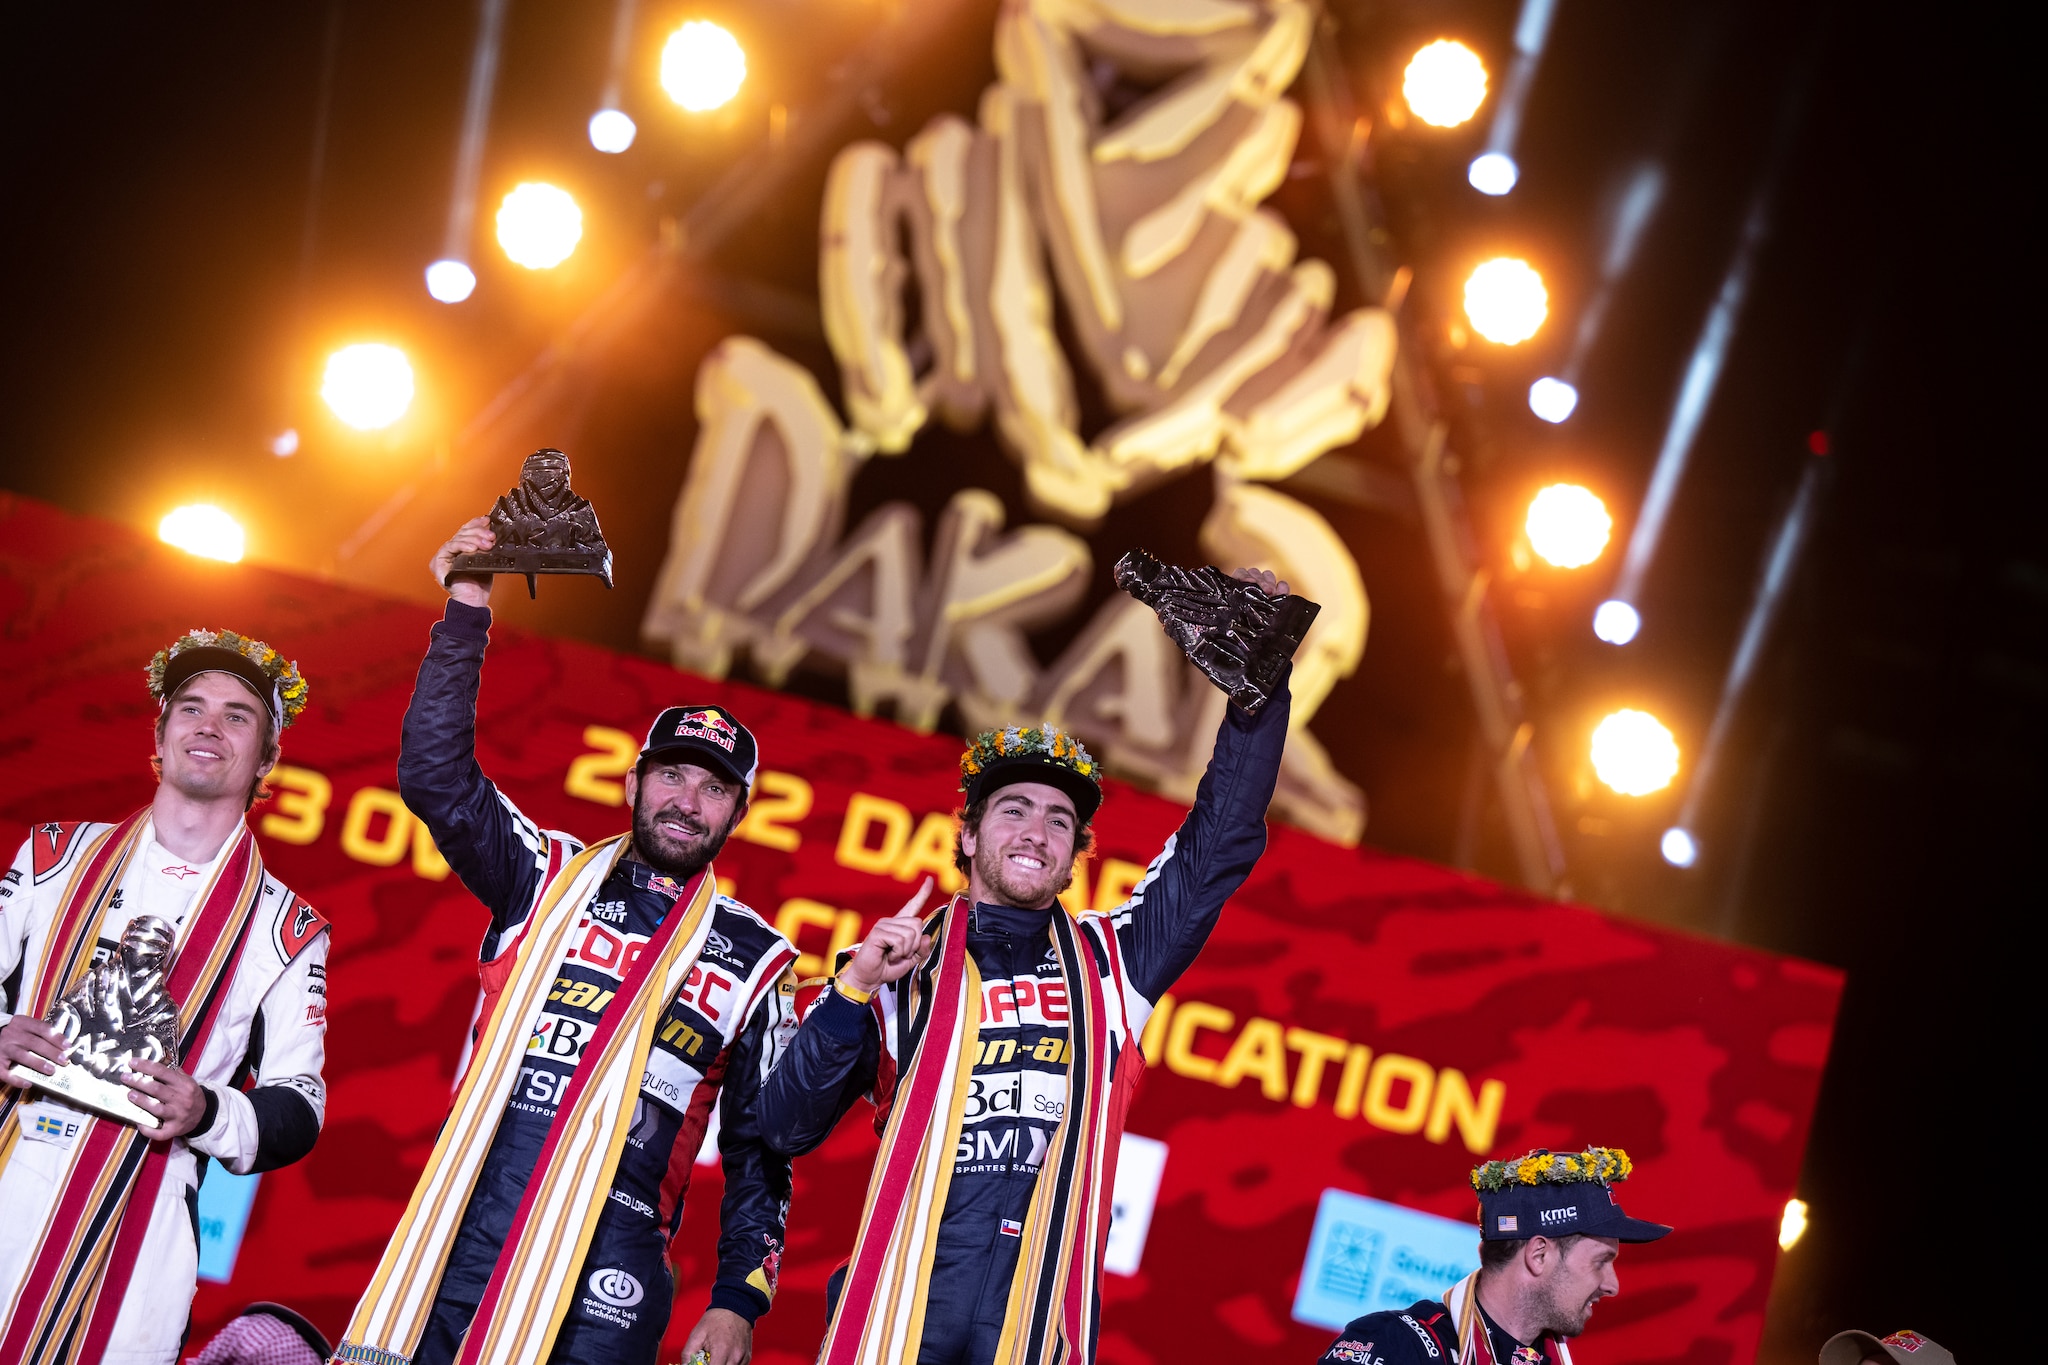 Can-Am riders celebrating another win on the podium with the Dakar sign in the backdrop. 